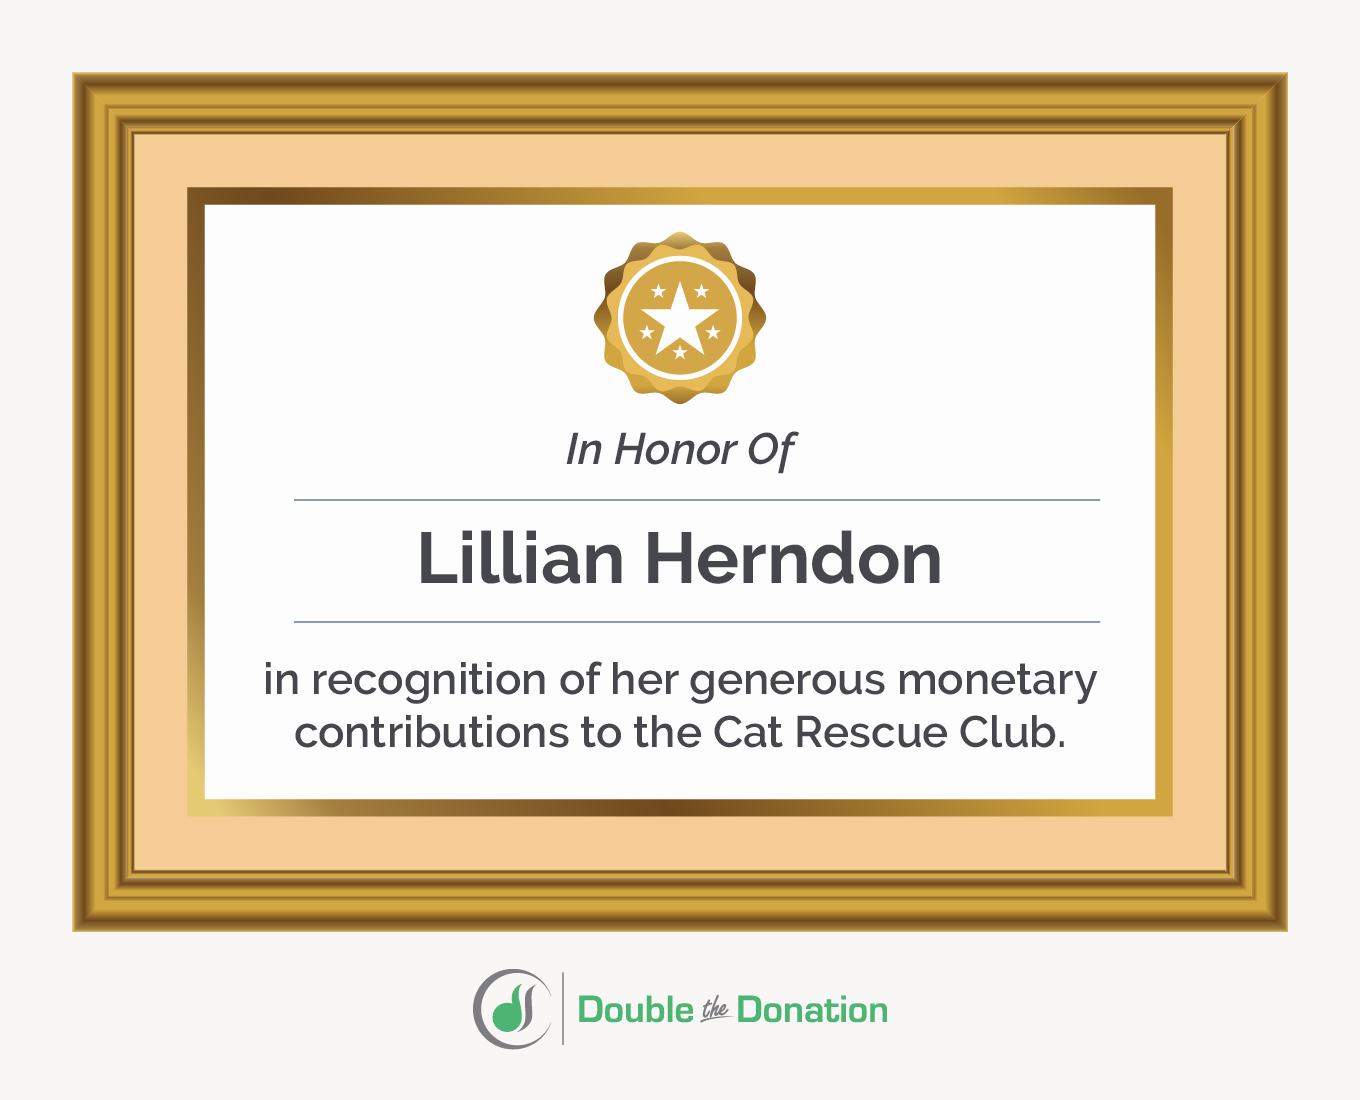 This is an example of a donor plaque, which can either be sent to the donor or displayed on a nonprofit's recognition wall.